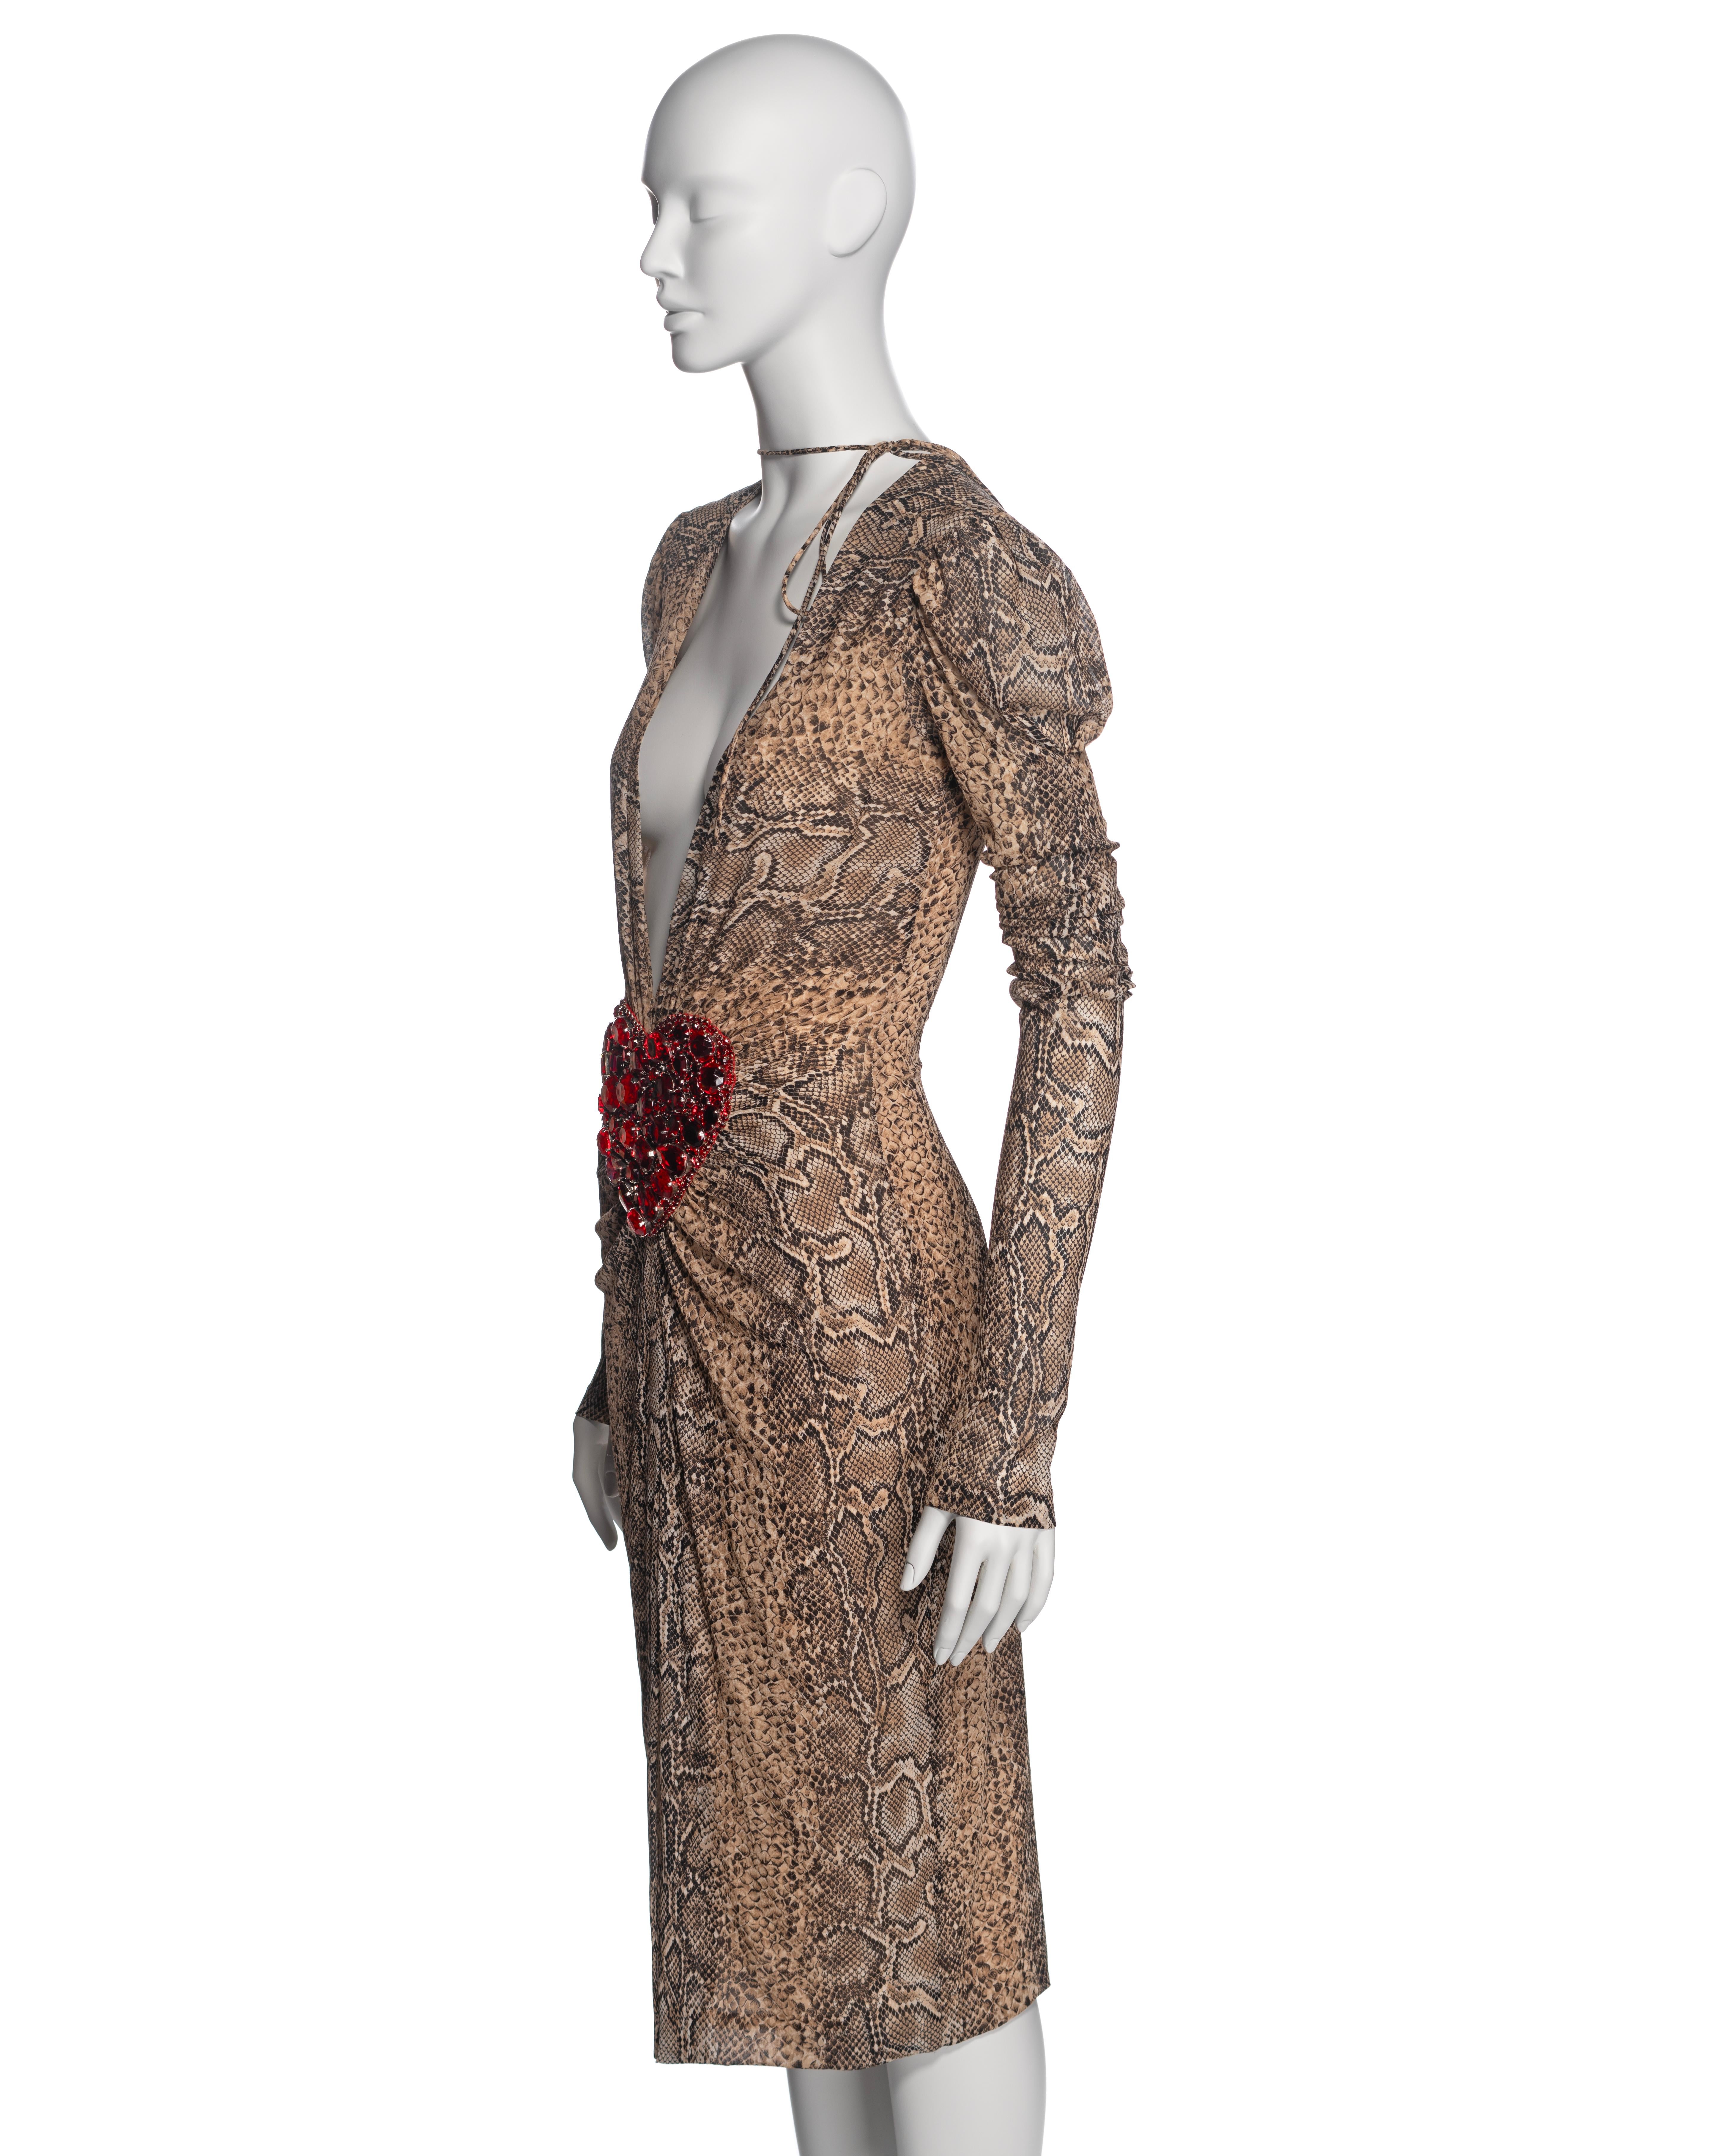 Dolce & Gabbana Snakeskin Print Low Plunge Dress with Crystal Heart, SS 2005 For Sale 6